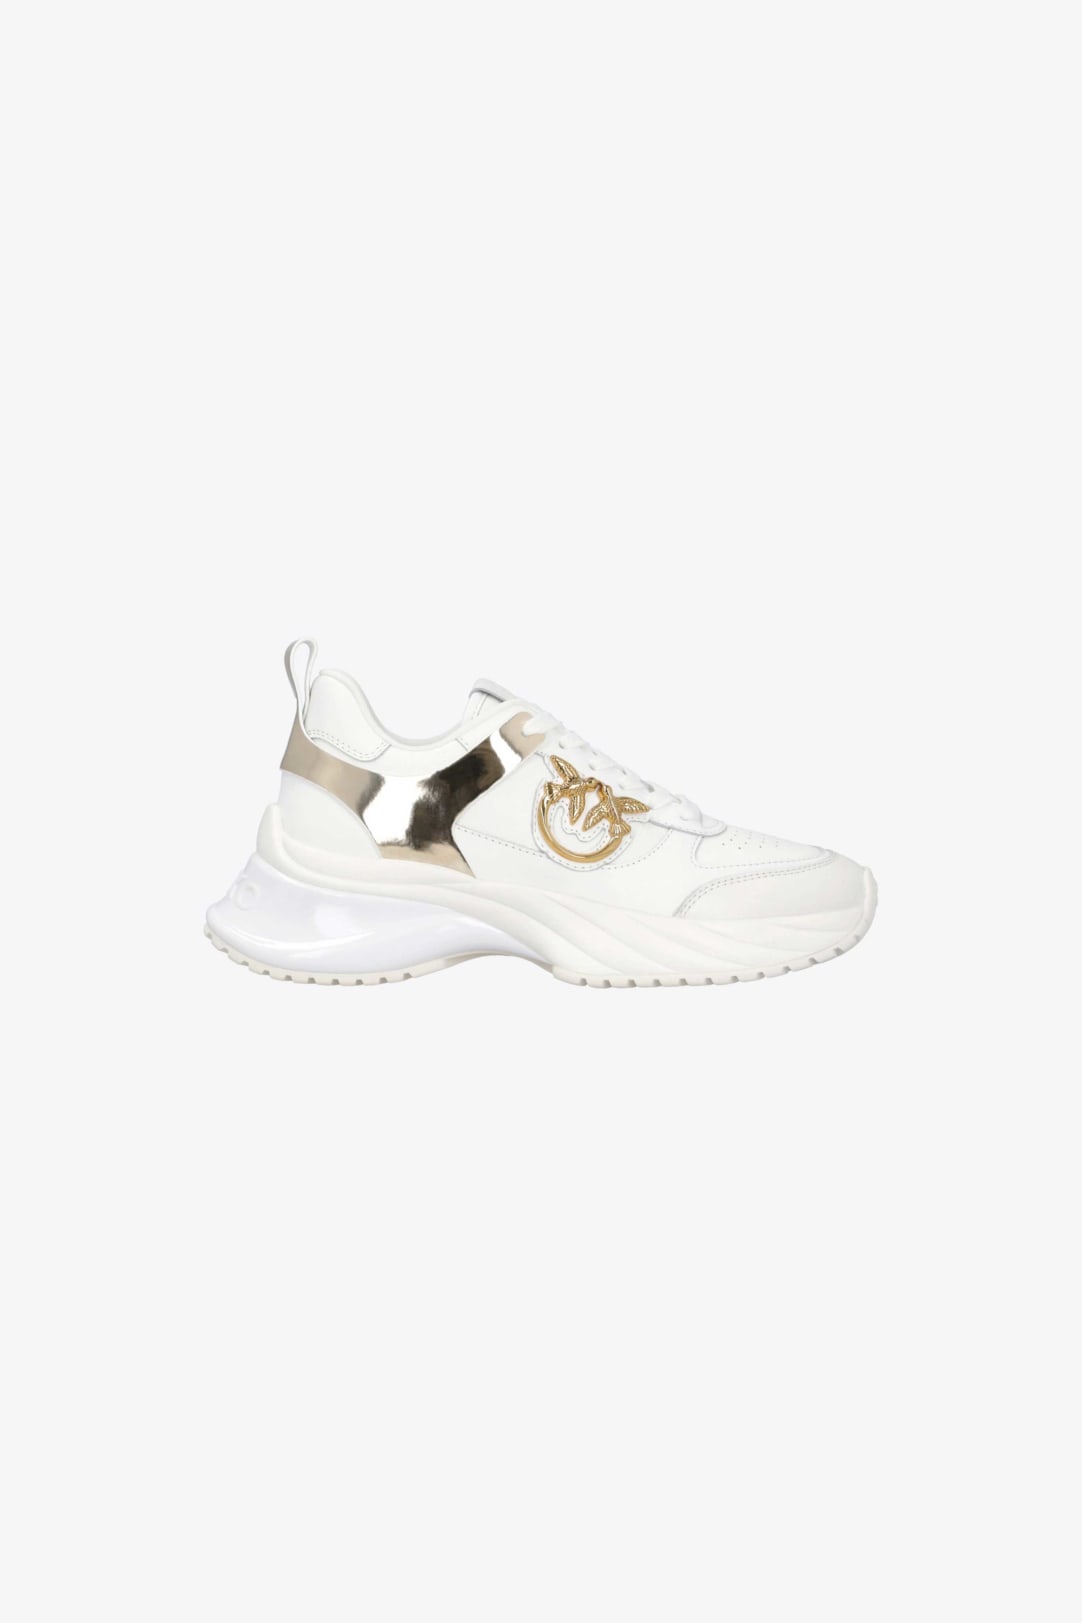 PINKO Ariel panelled leather sneakers - White